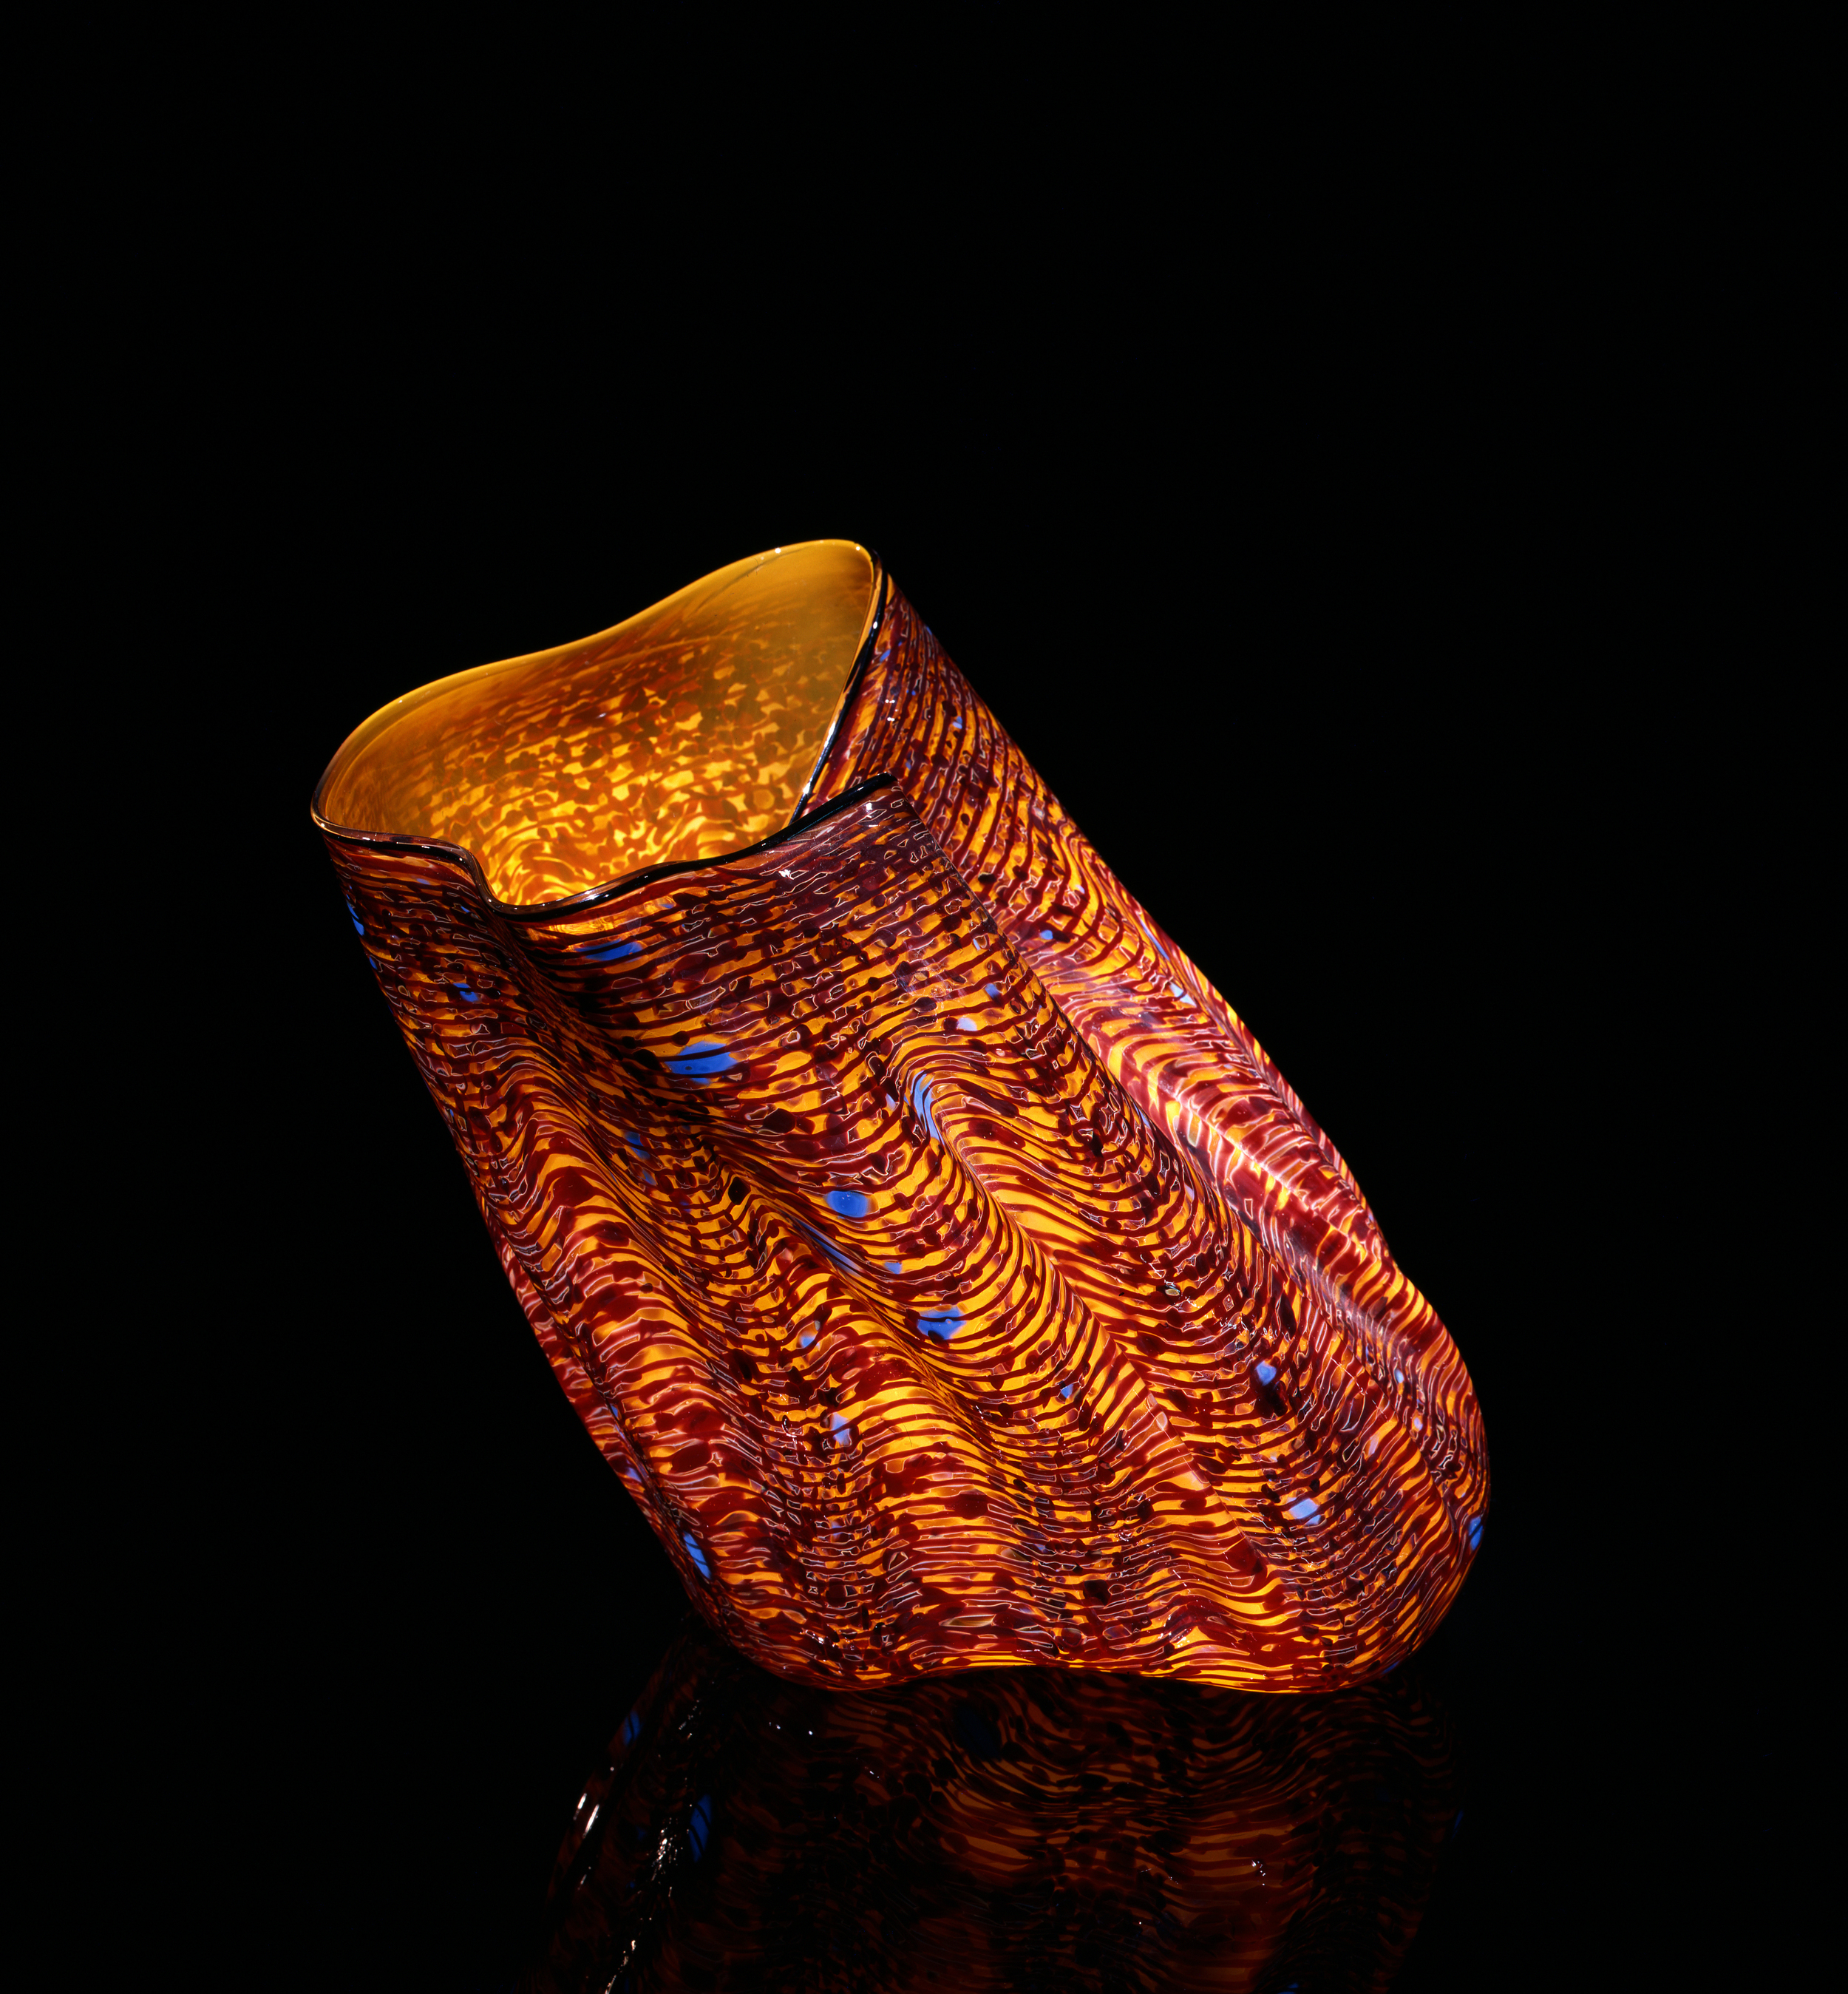  Dale Chihuly,&nbsp; Delta Yellow Macchia with Cassel Lip Wrap&nbsp; (1981, glass, 10 x 10 x 10&nbsp;inches), DC.57 